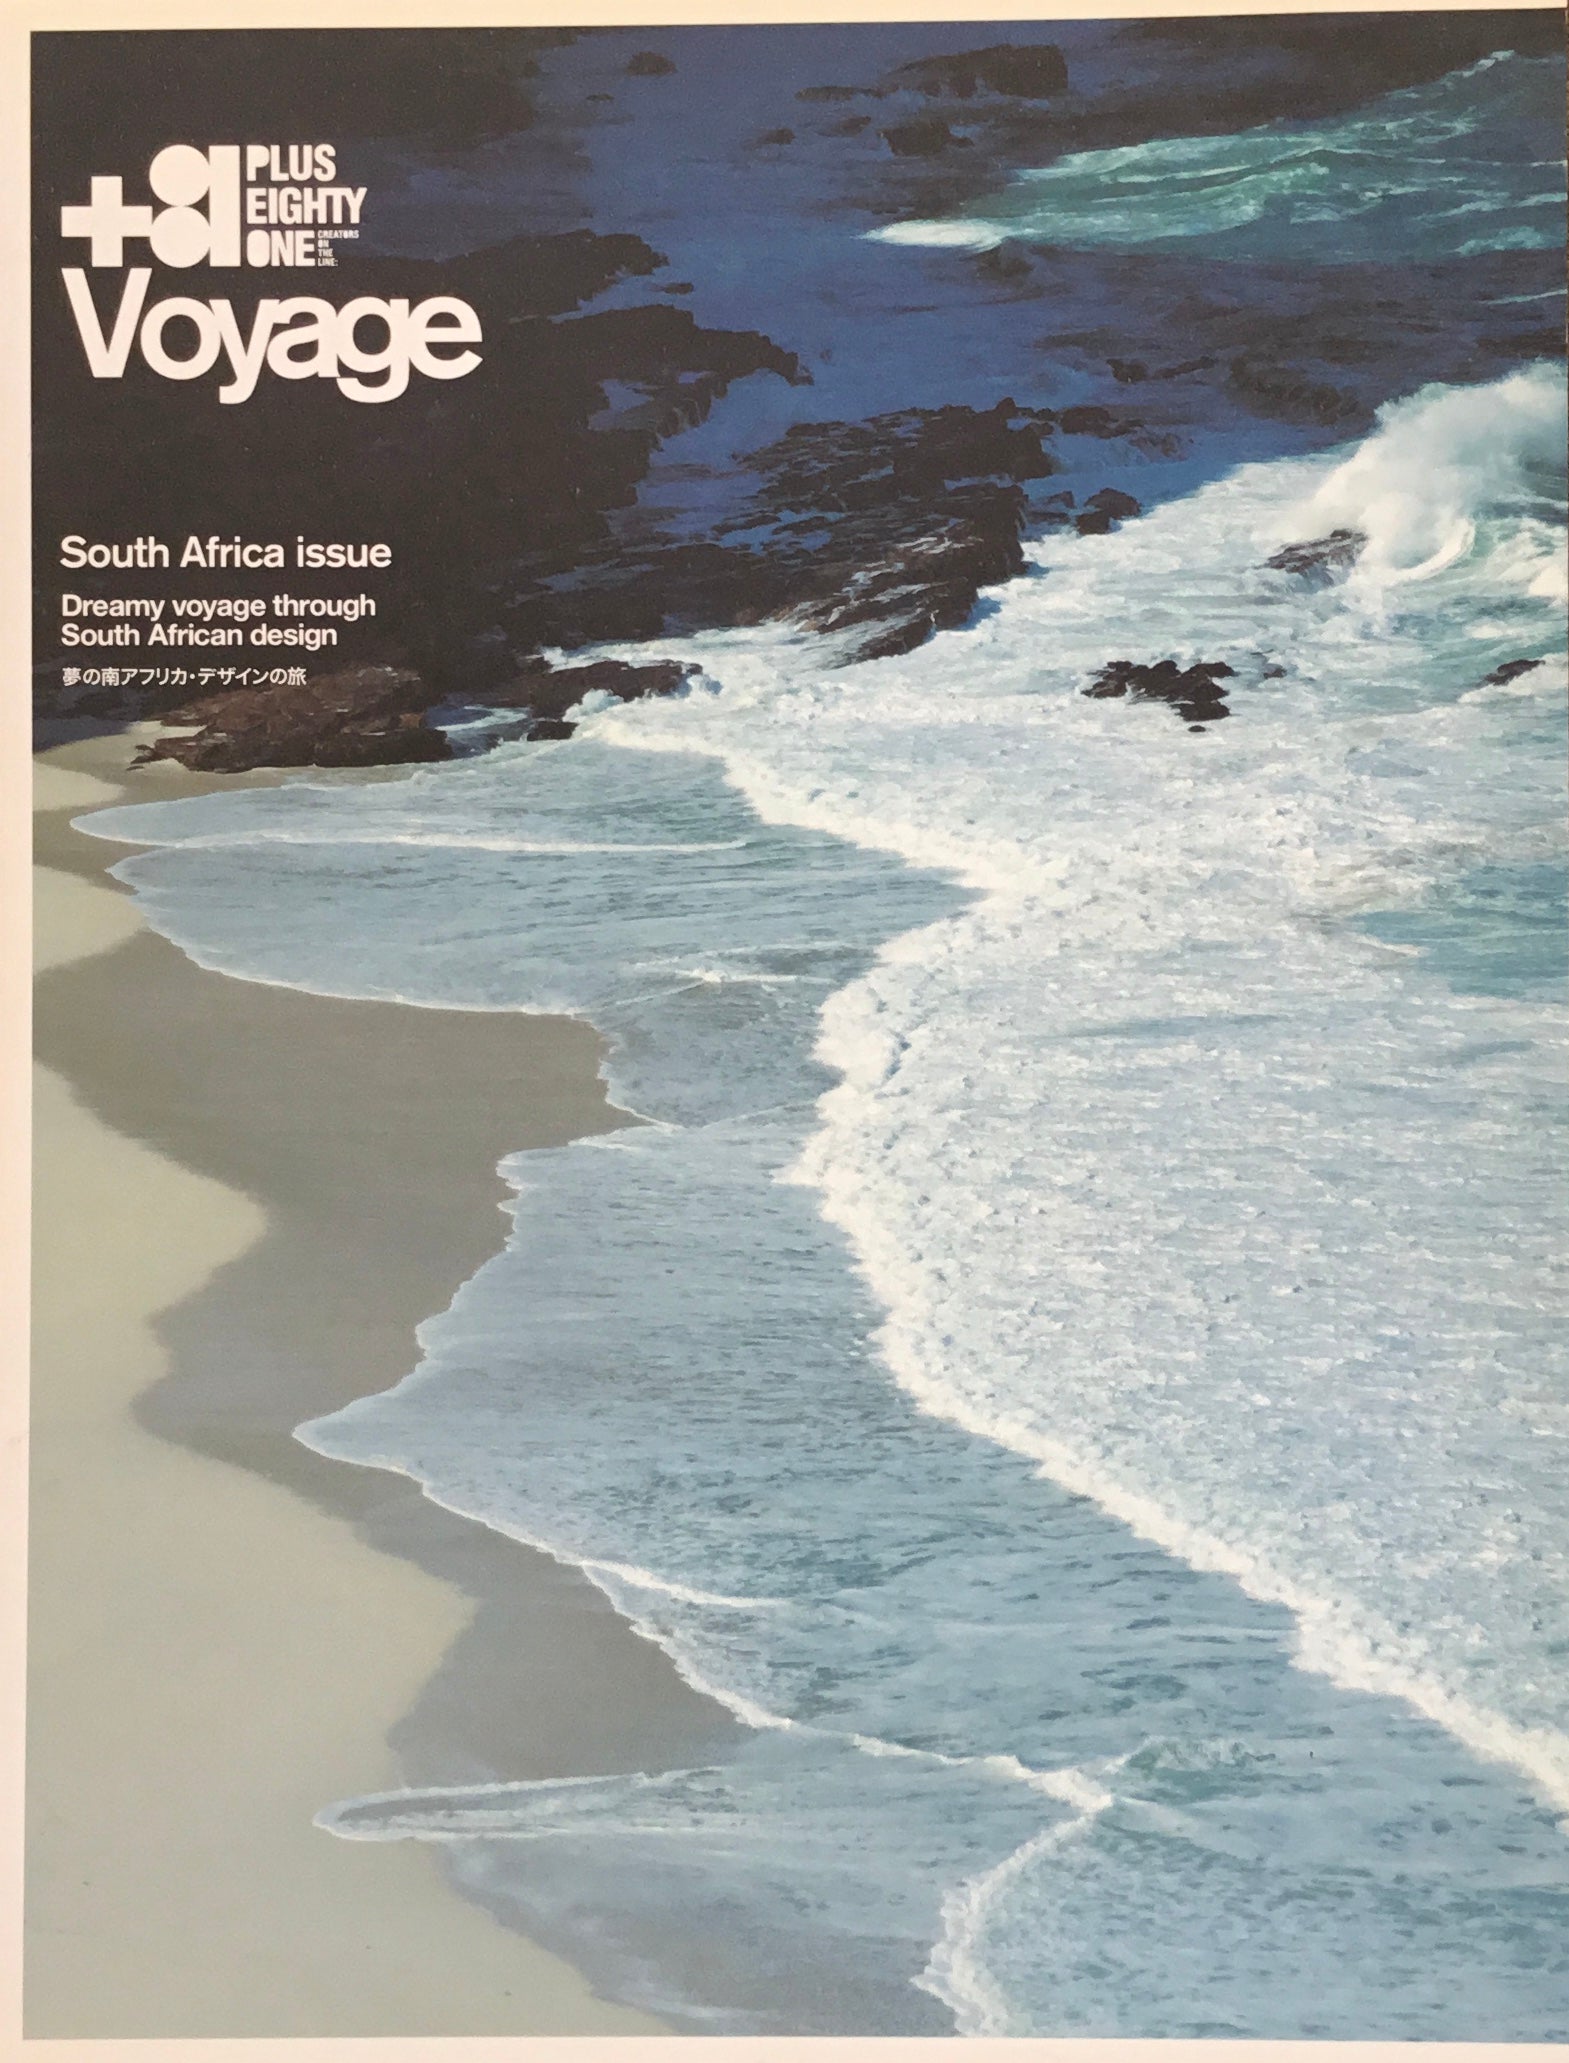 +81 Voyage　South Africa issue　夢の南アフリカ・デザインの旅